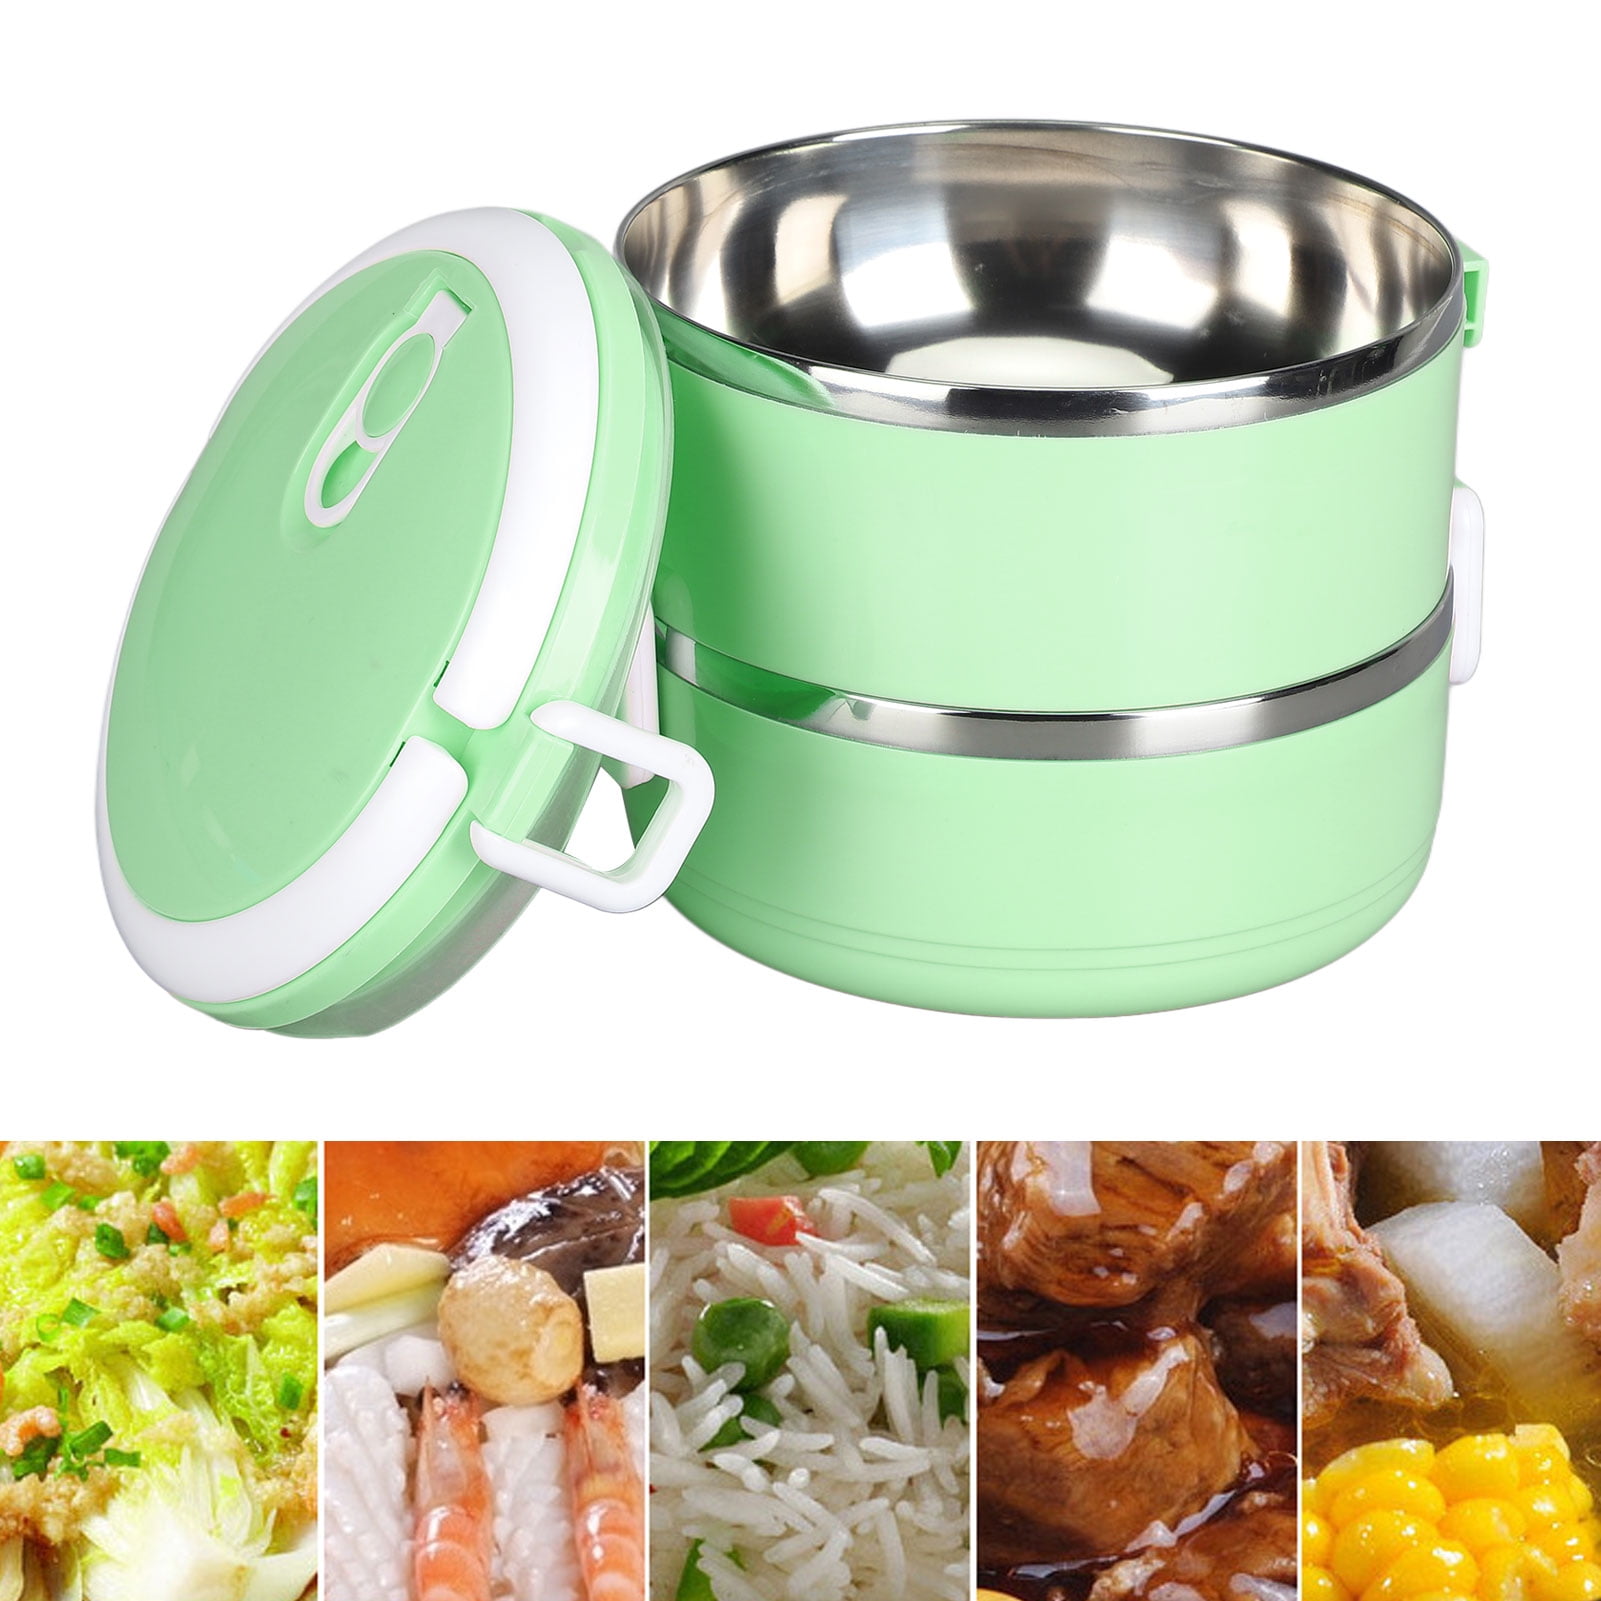 Deals！SDJMa Lunch Box 900ml 1 Layer Thermal Insulated Hot Food